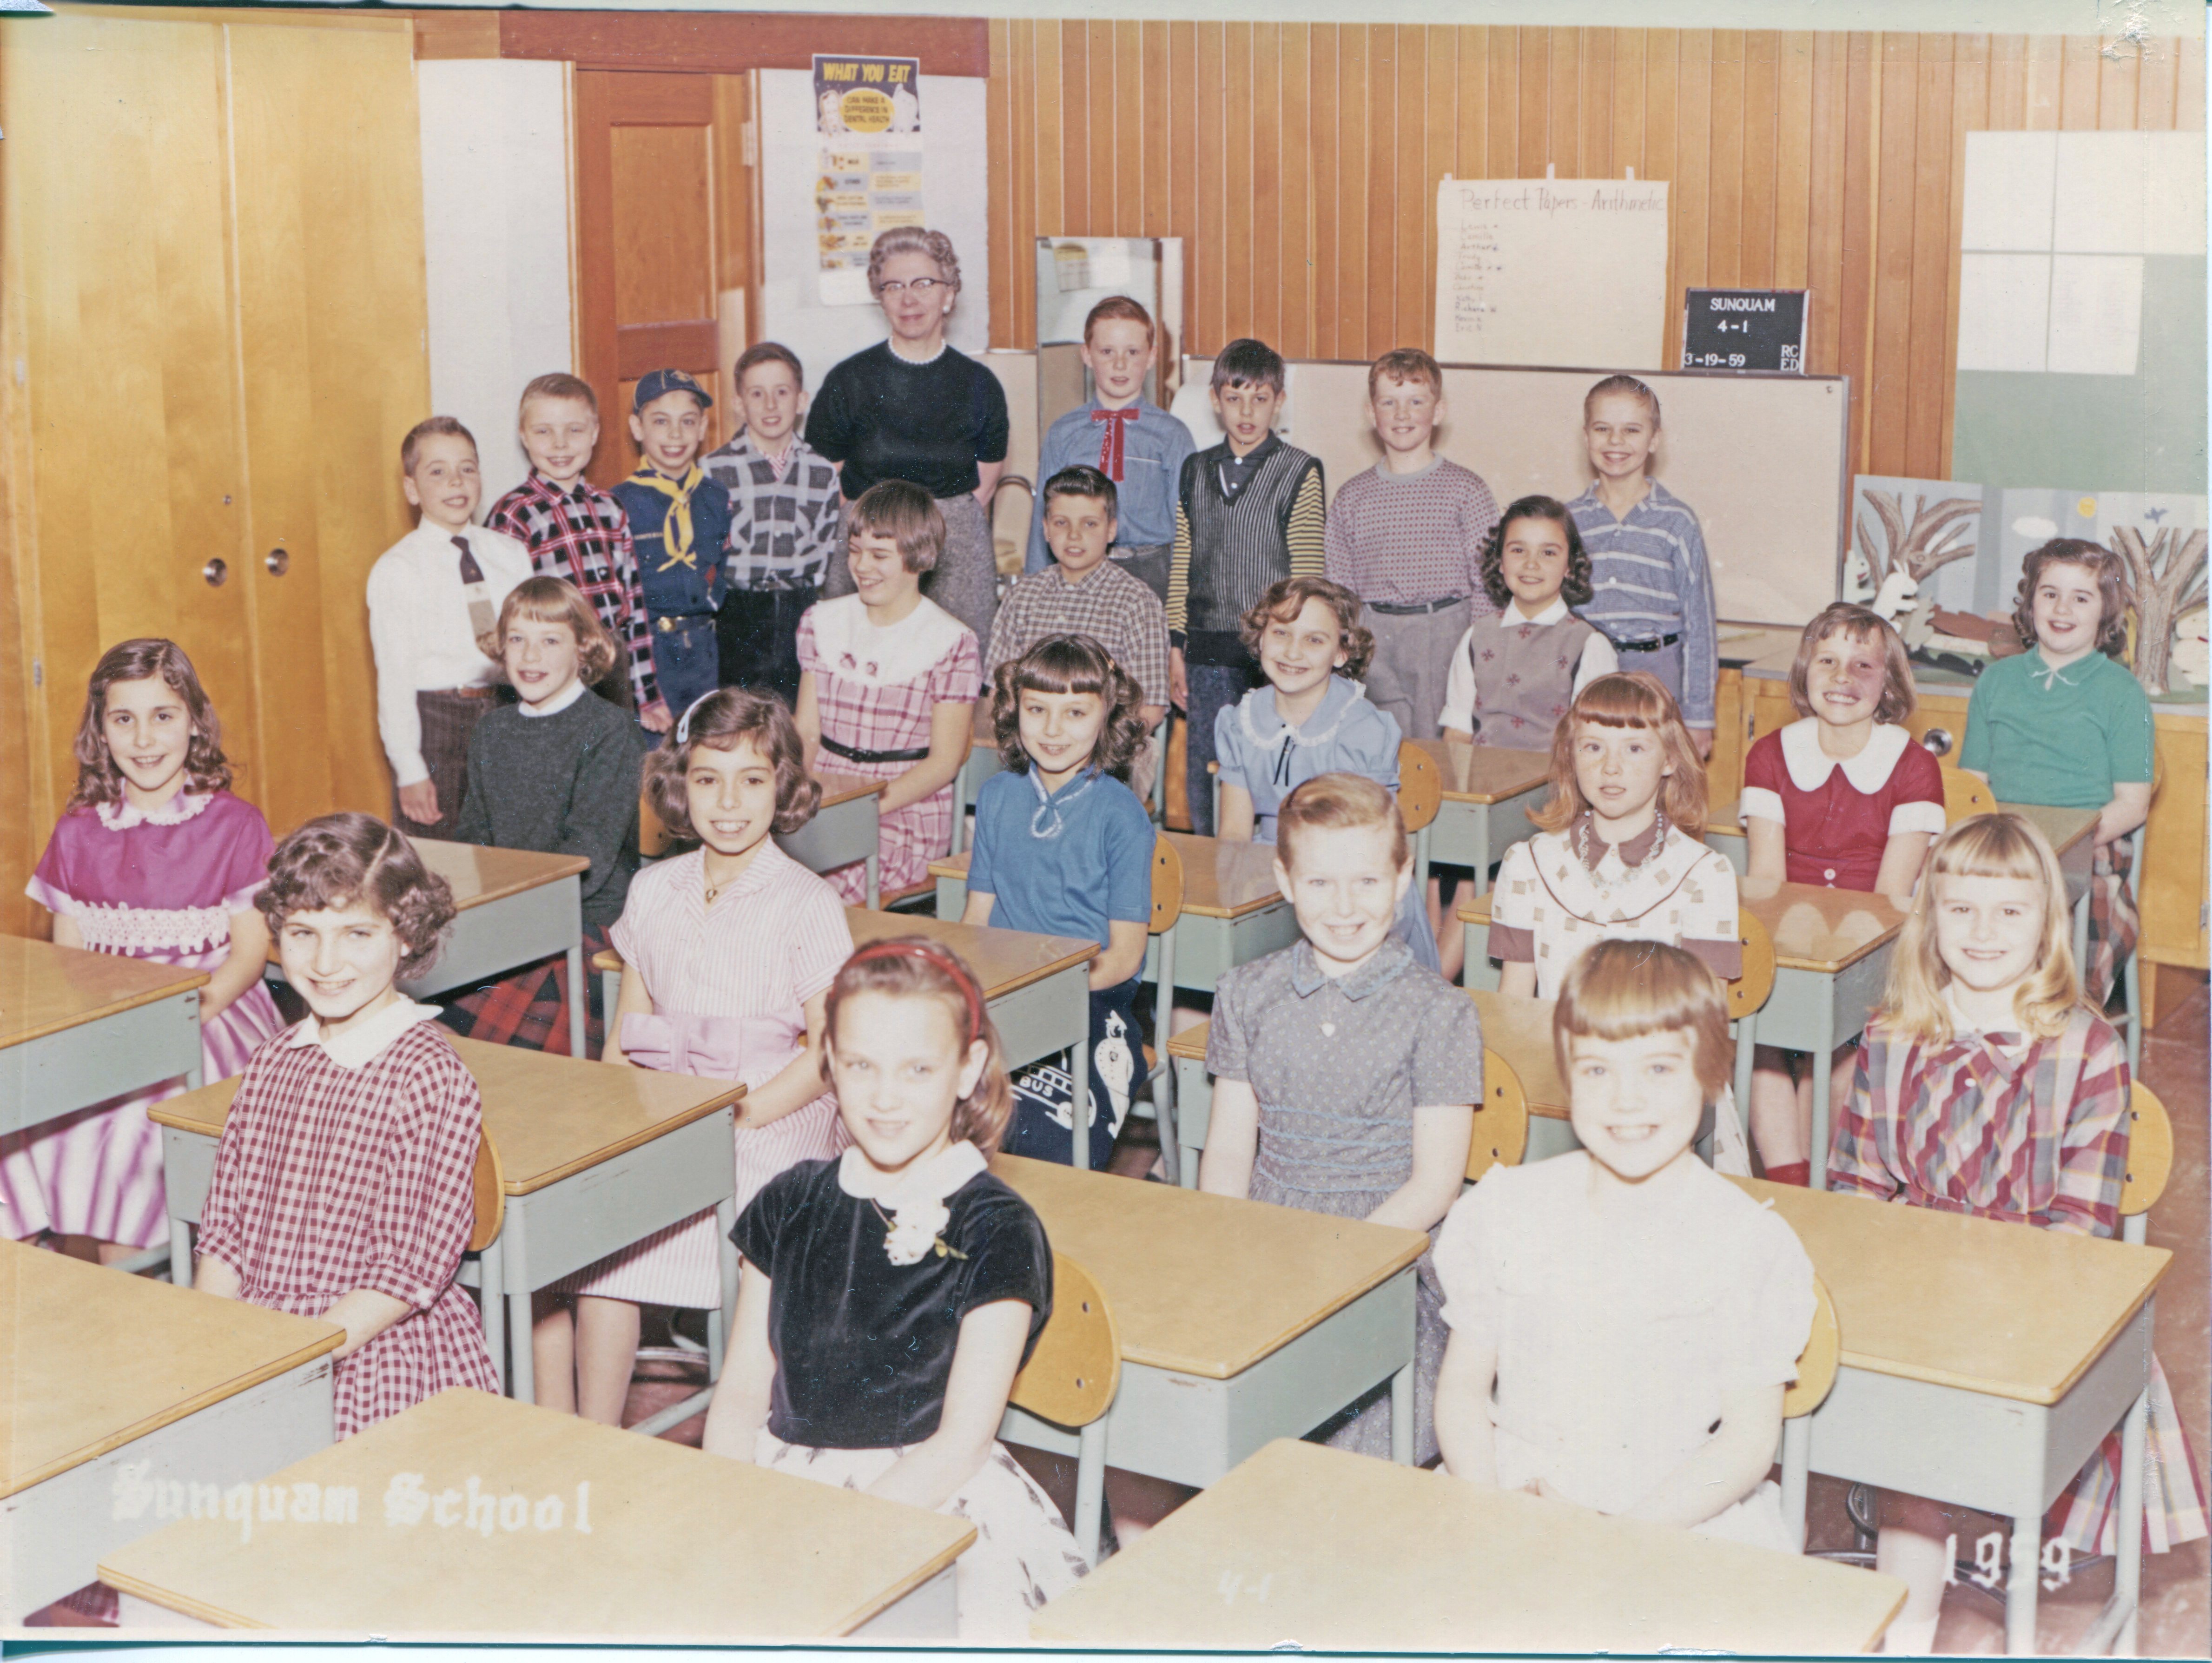 Color photo of the Sunquam school 4th grade class with teacher Mrs. Darling